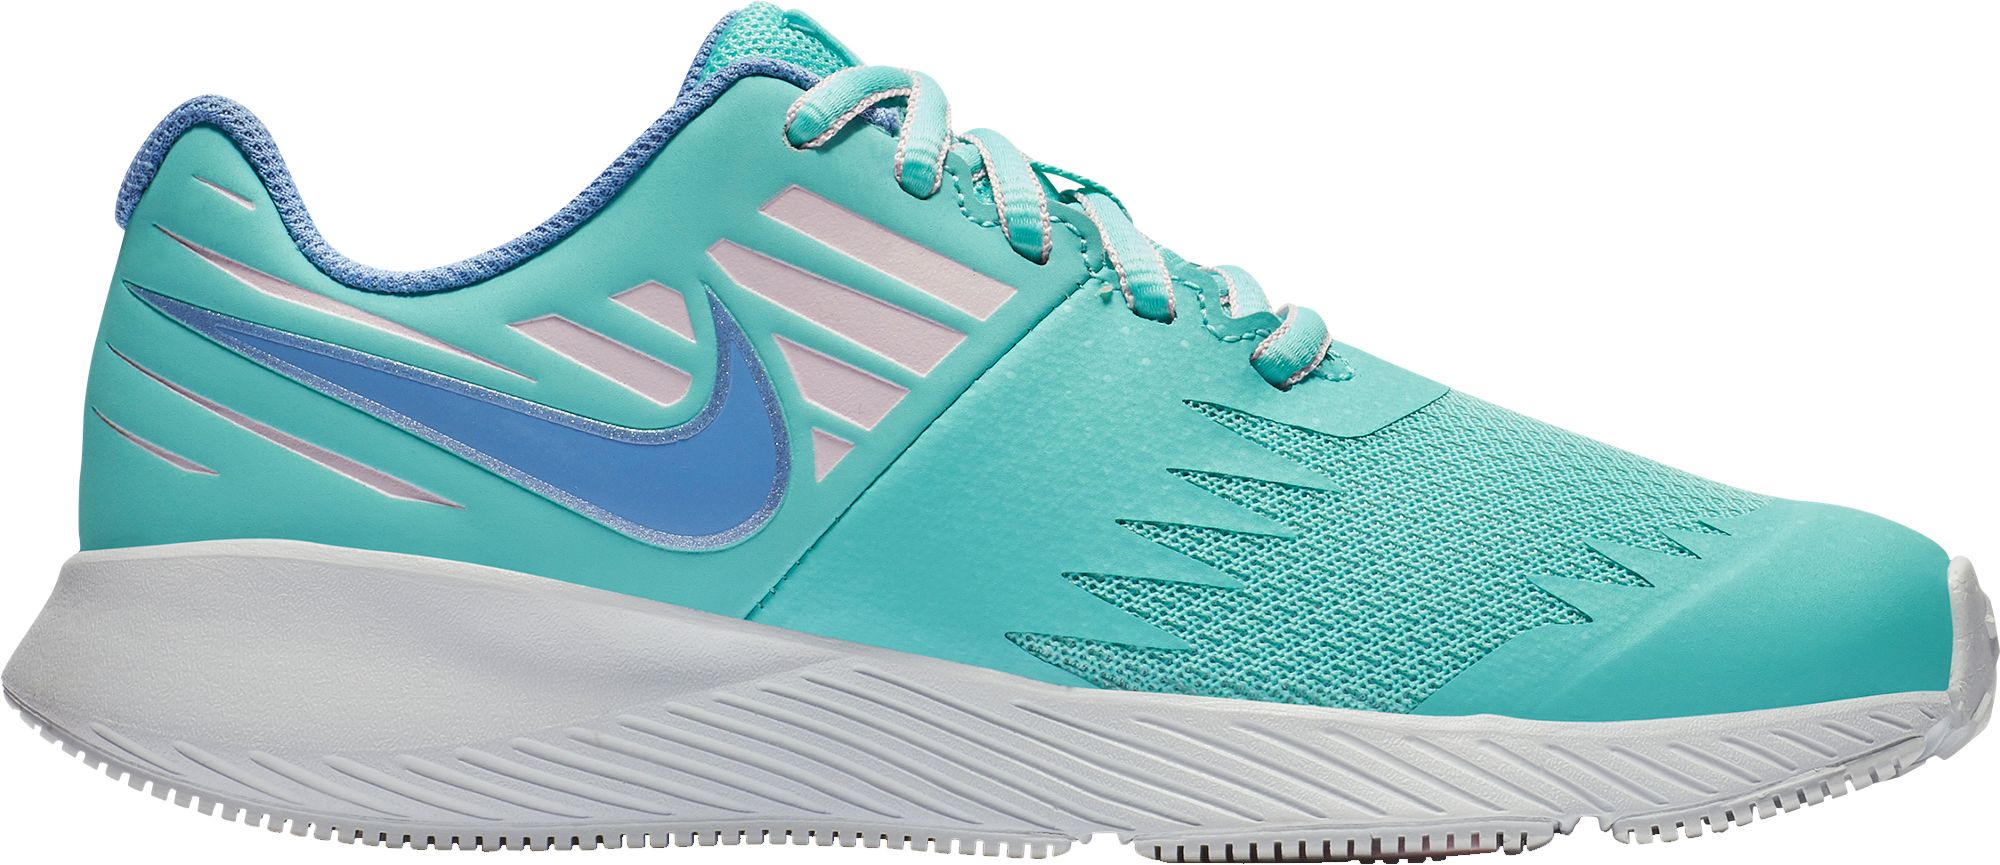 blue nike shoes for girls